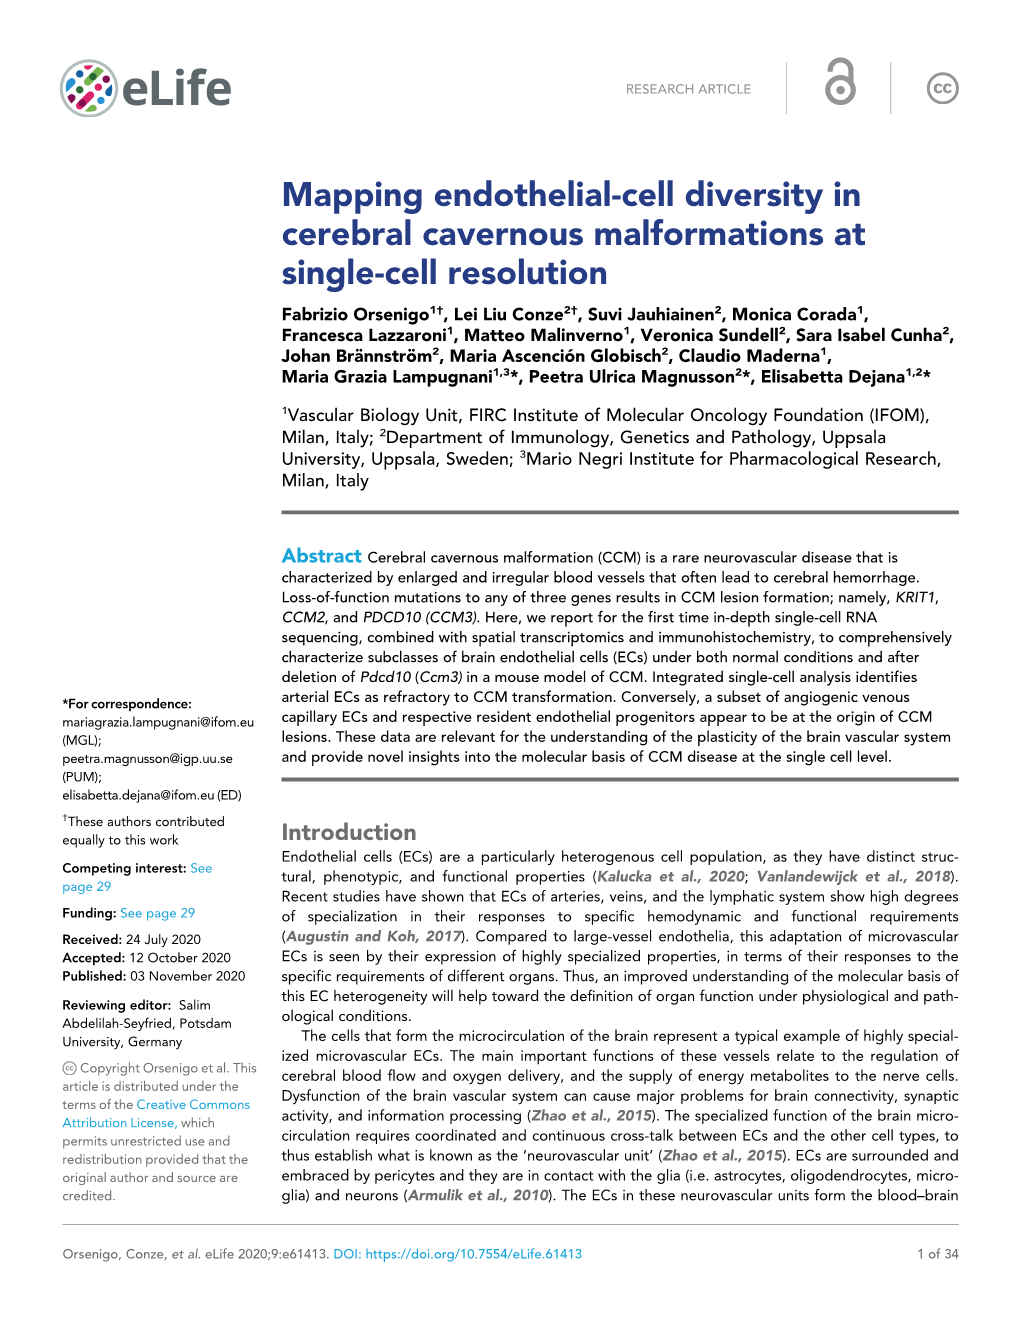 Mapping Endothelial-Cell Diversity in Cerebral Cavernous Malformations